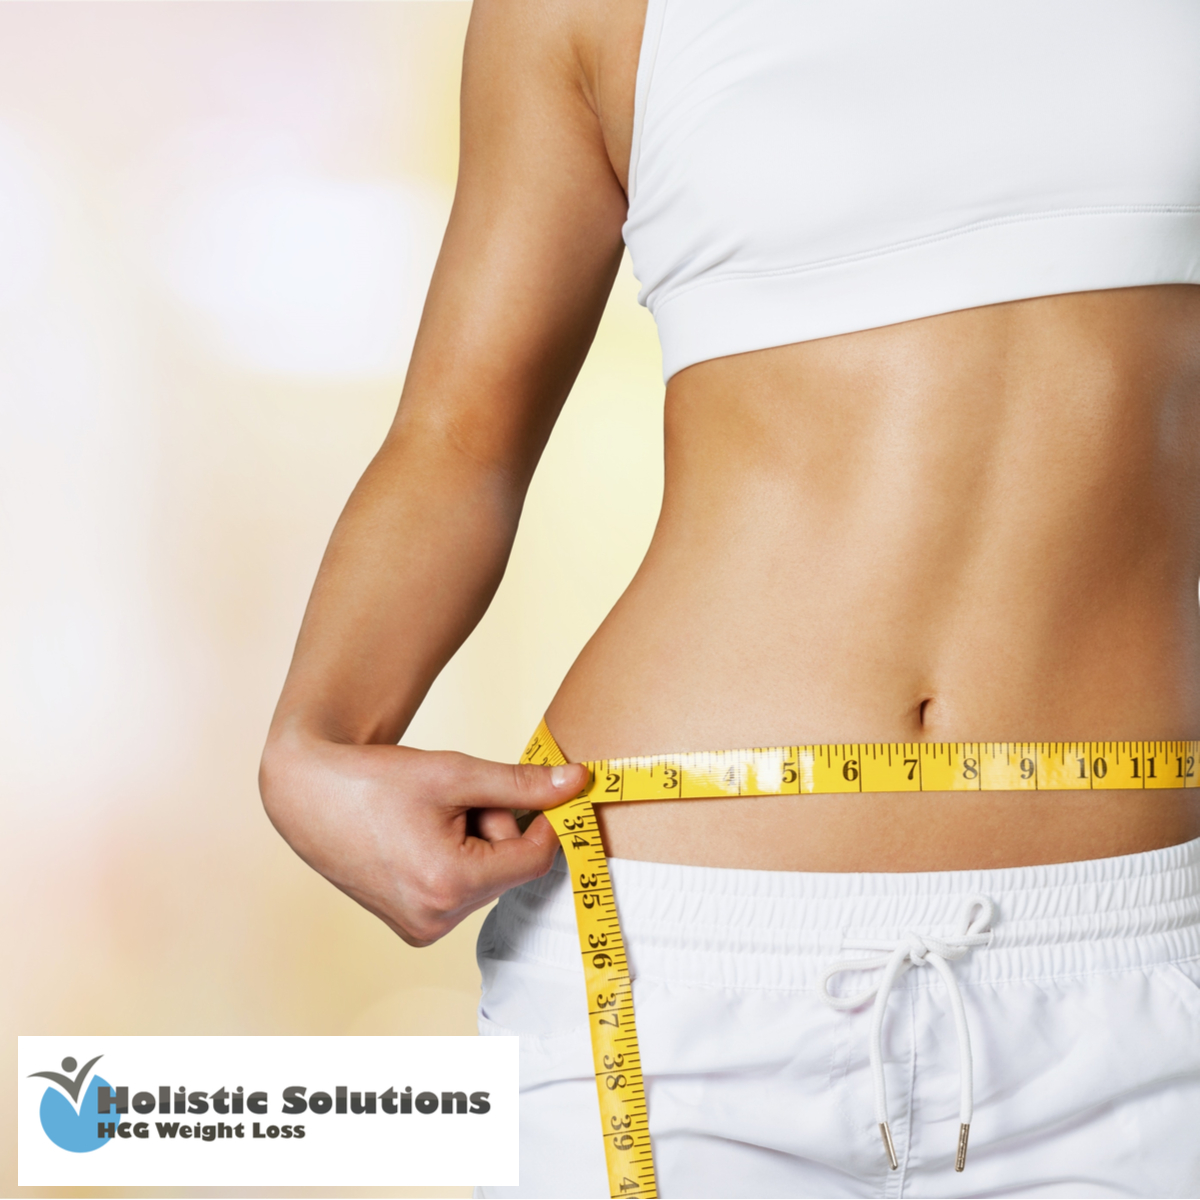 Get Details About HCG Weight Loss Injections Near Chula Vista